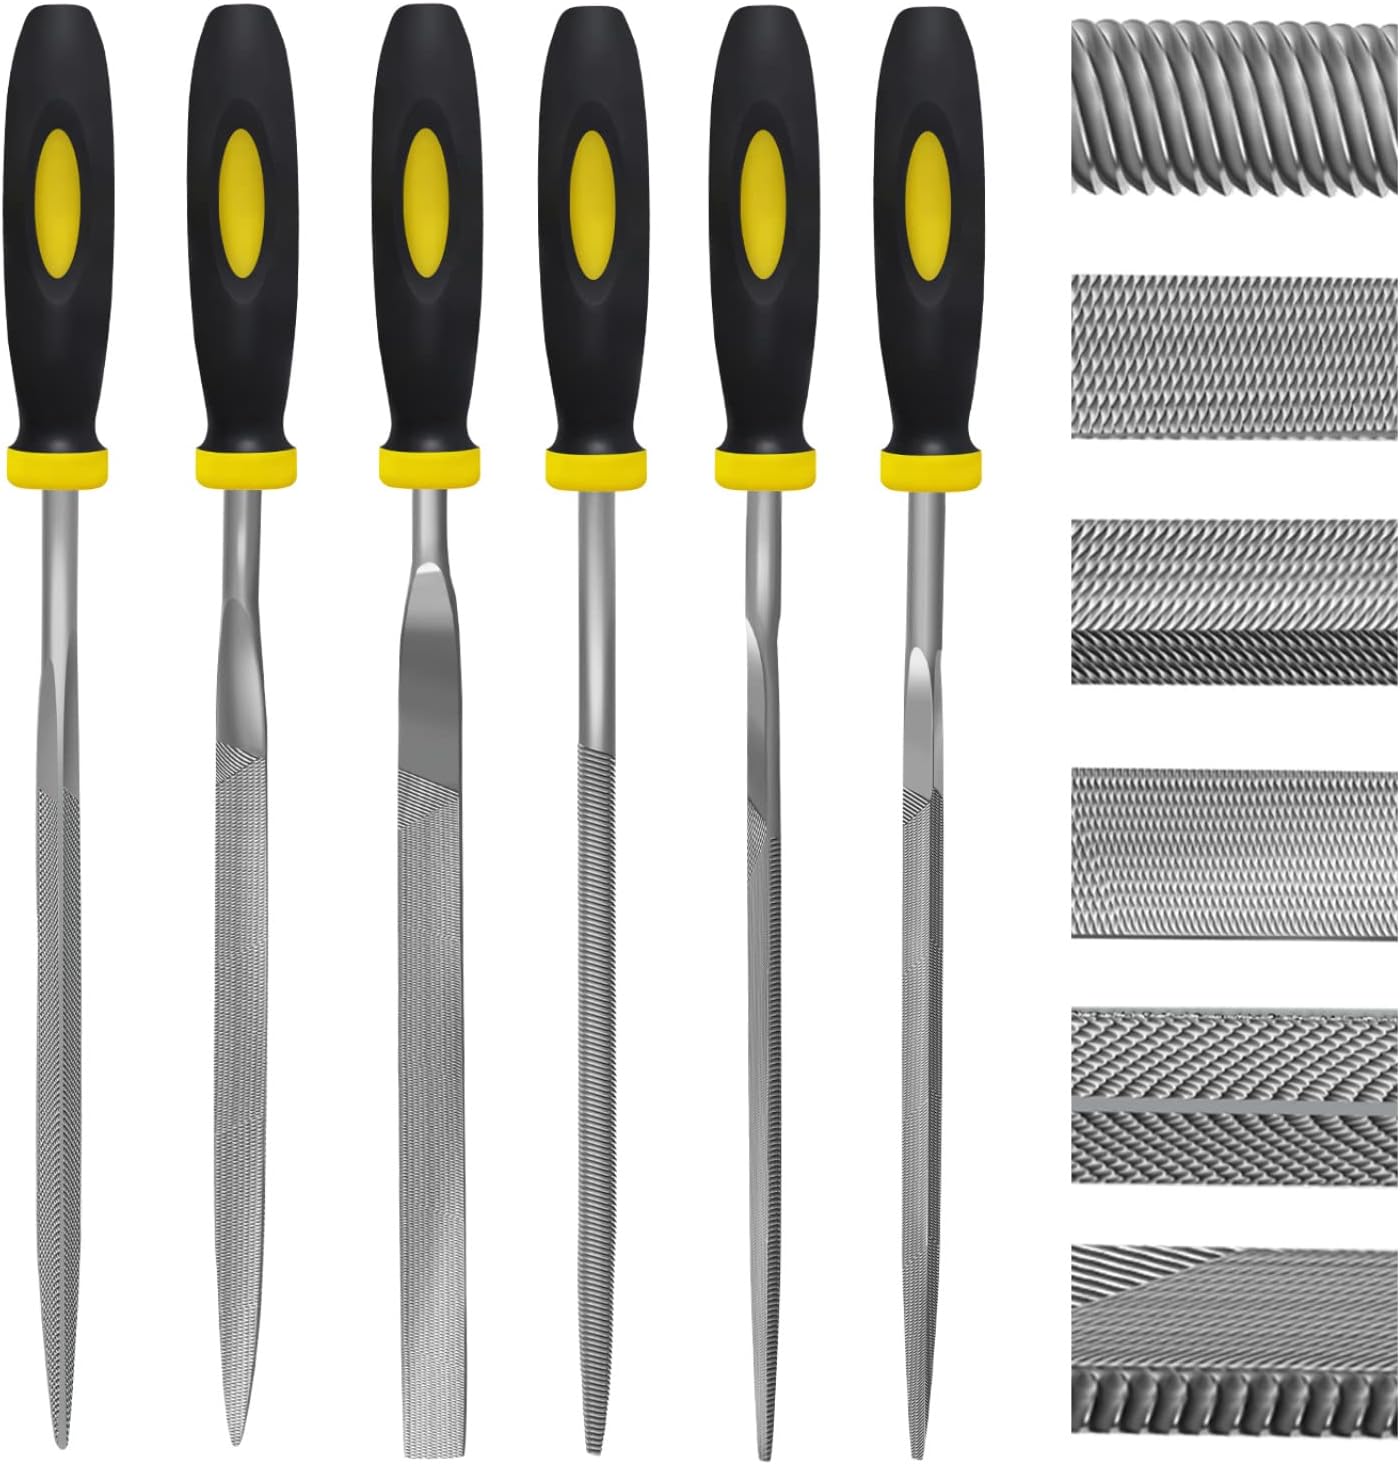 Kapoua Needle File Set Hardened Alloy Strength Steel Set for 6 Pieces Hand Metal Files, Includes Flat, Flat Warding, Square, Triangula